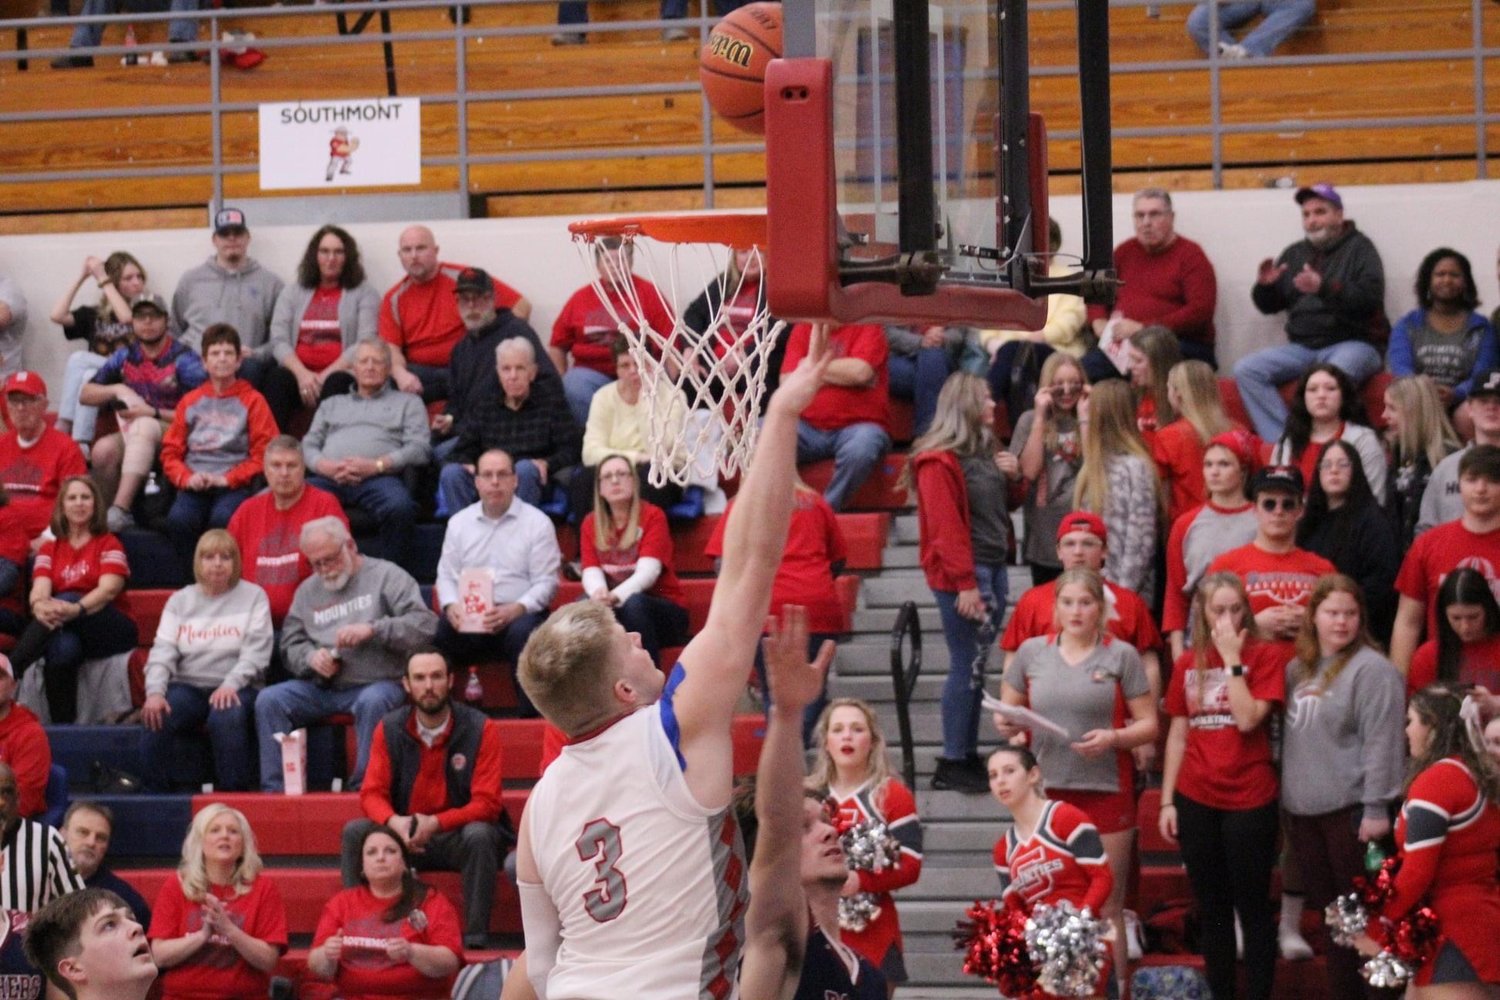 Carson Chadd will once again be the big man in the post for Southmont this season. He'll look to up his scoring with the loss of Avery Saunders and Logan Oppy from a year ago.